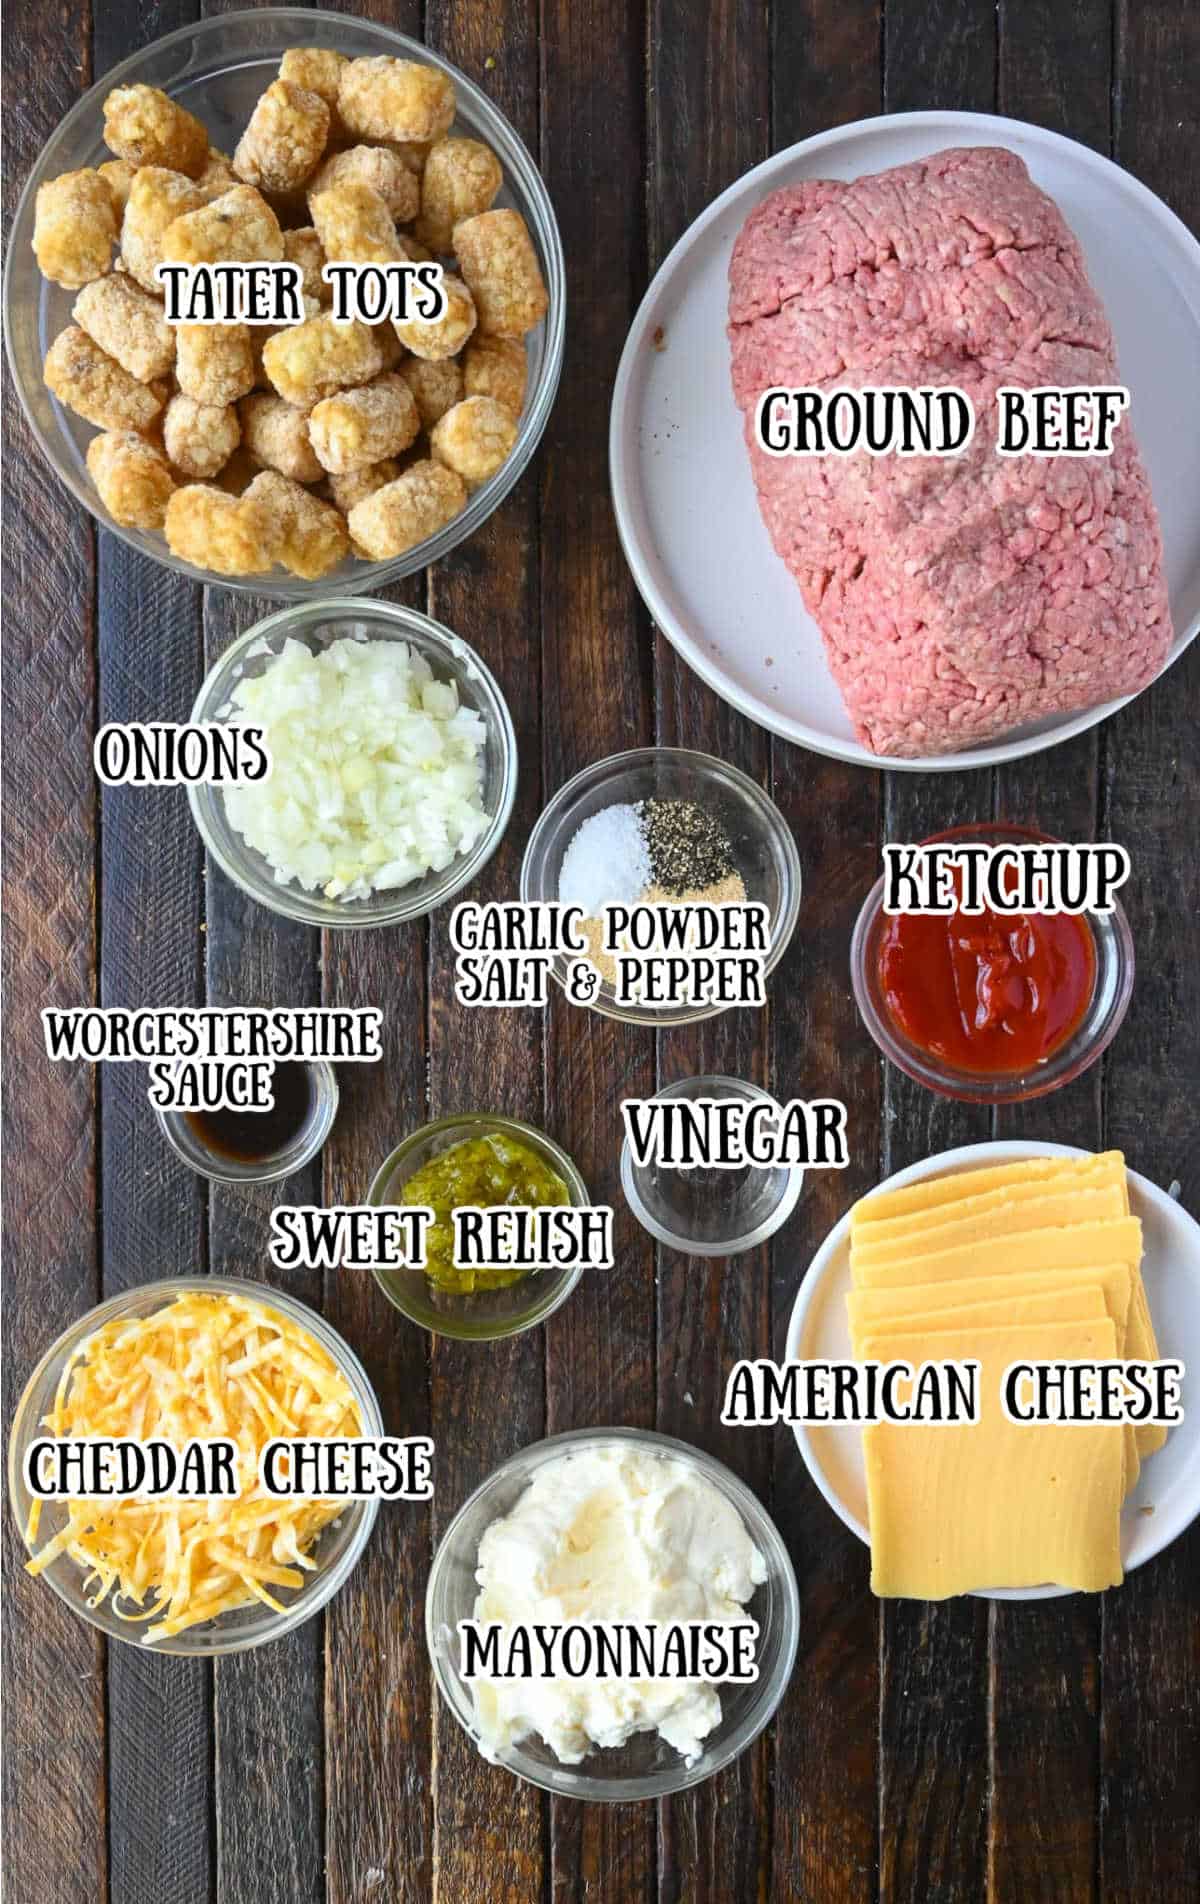 All the ingredients needed for big mac casserole